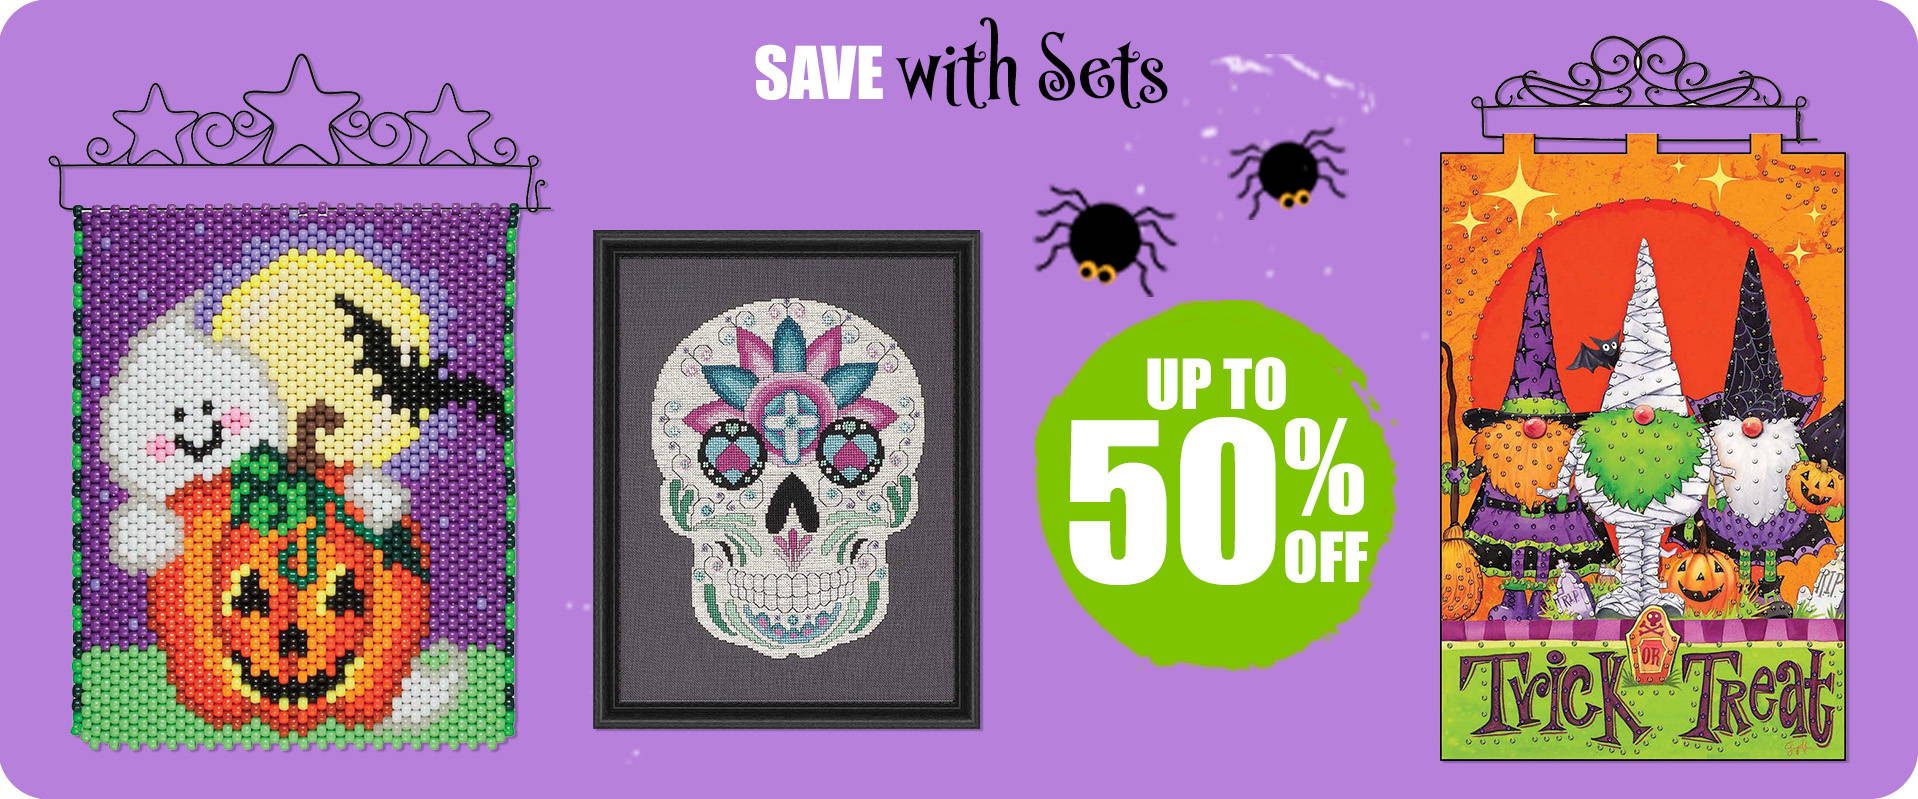 Save up to 50% on Sets. Image: Featured Halloween items from sets.